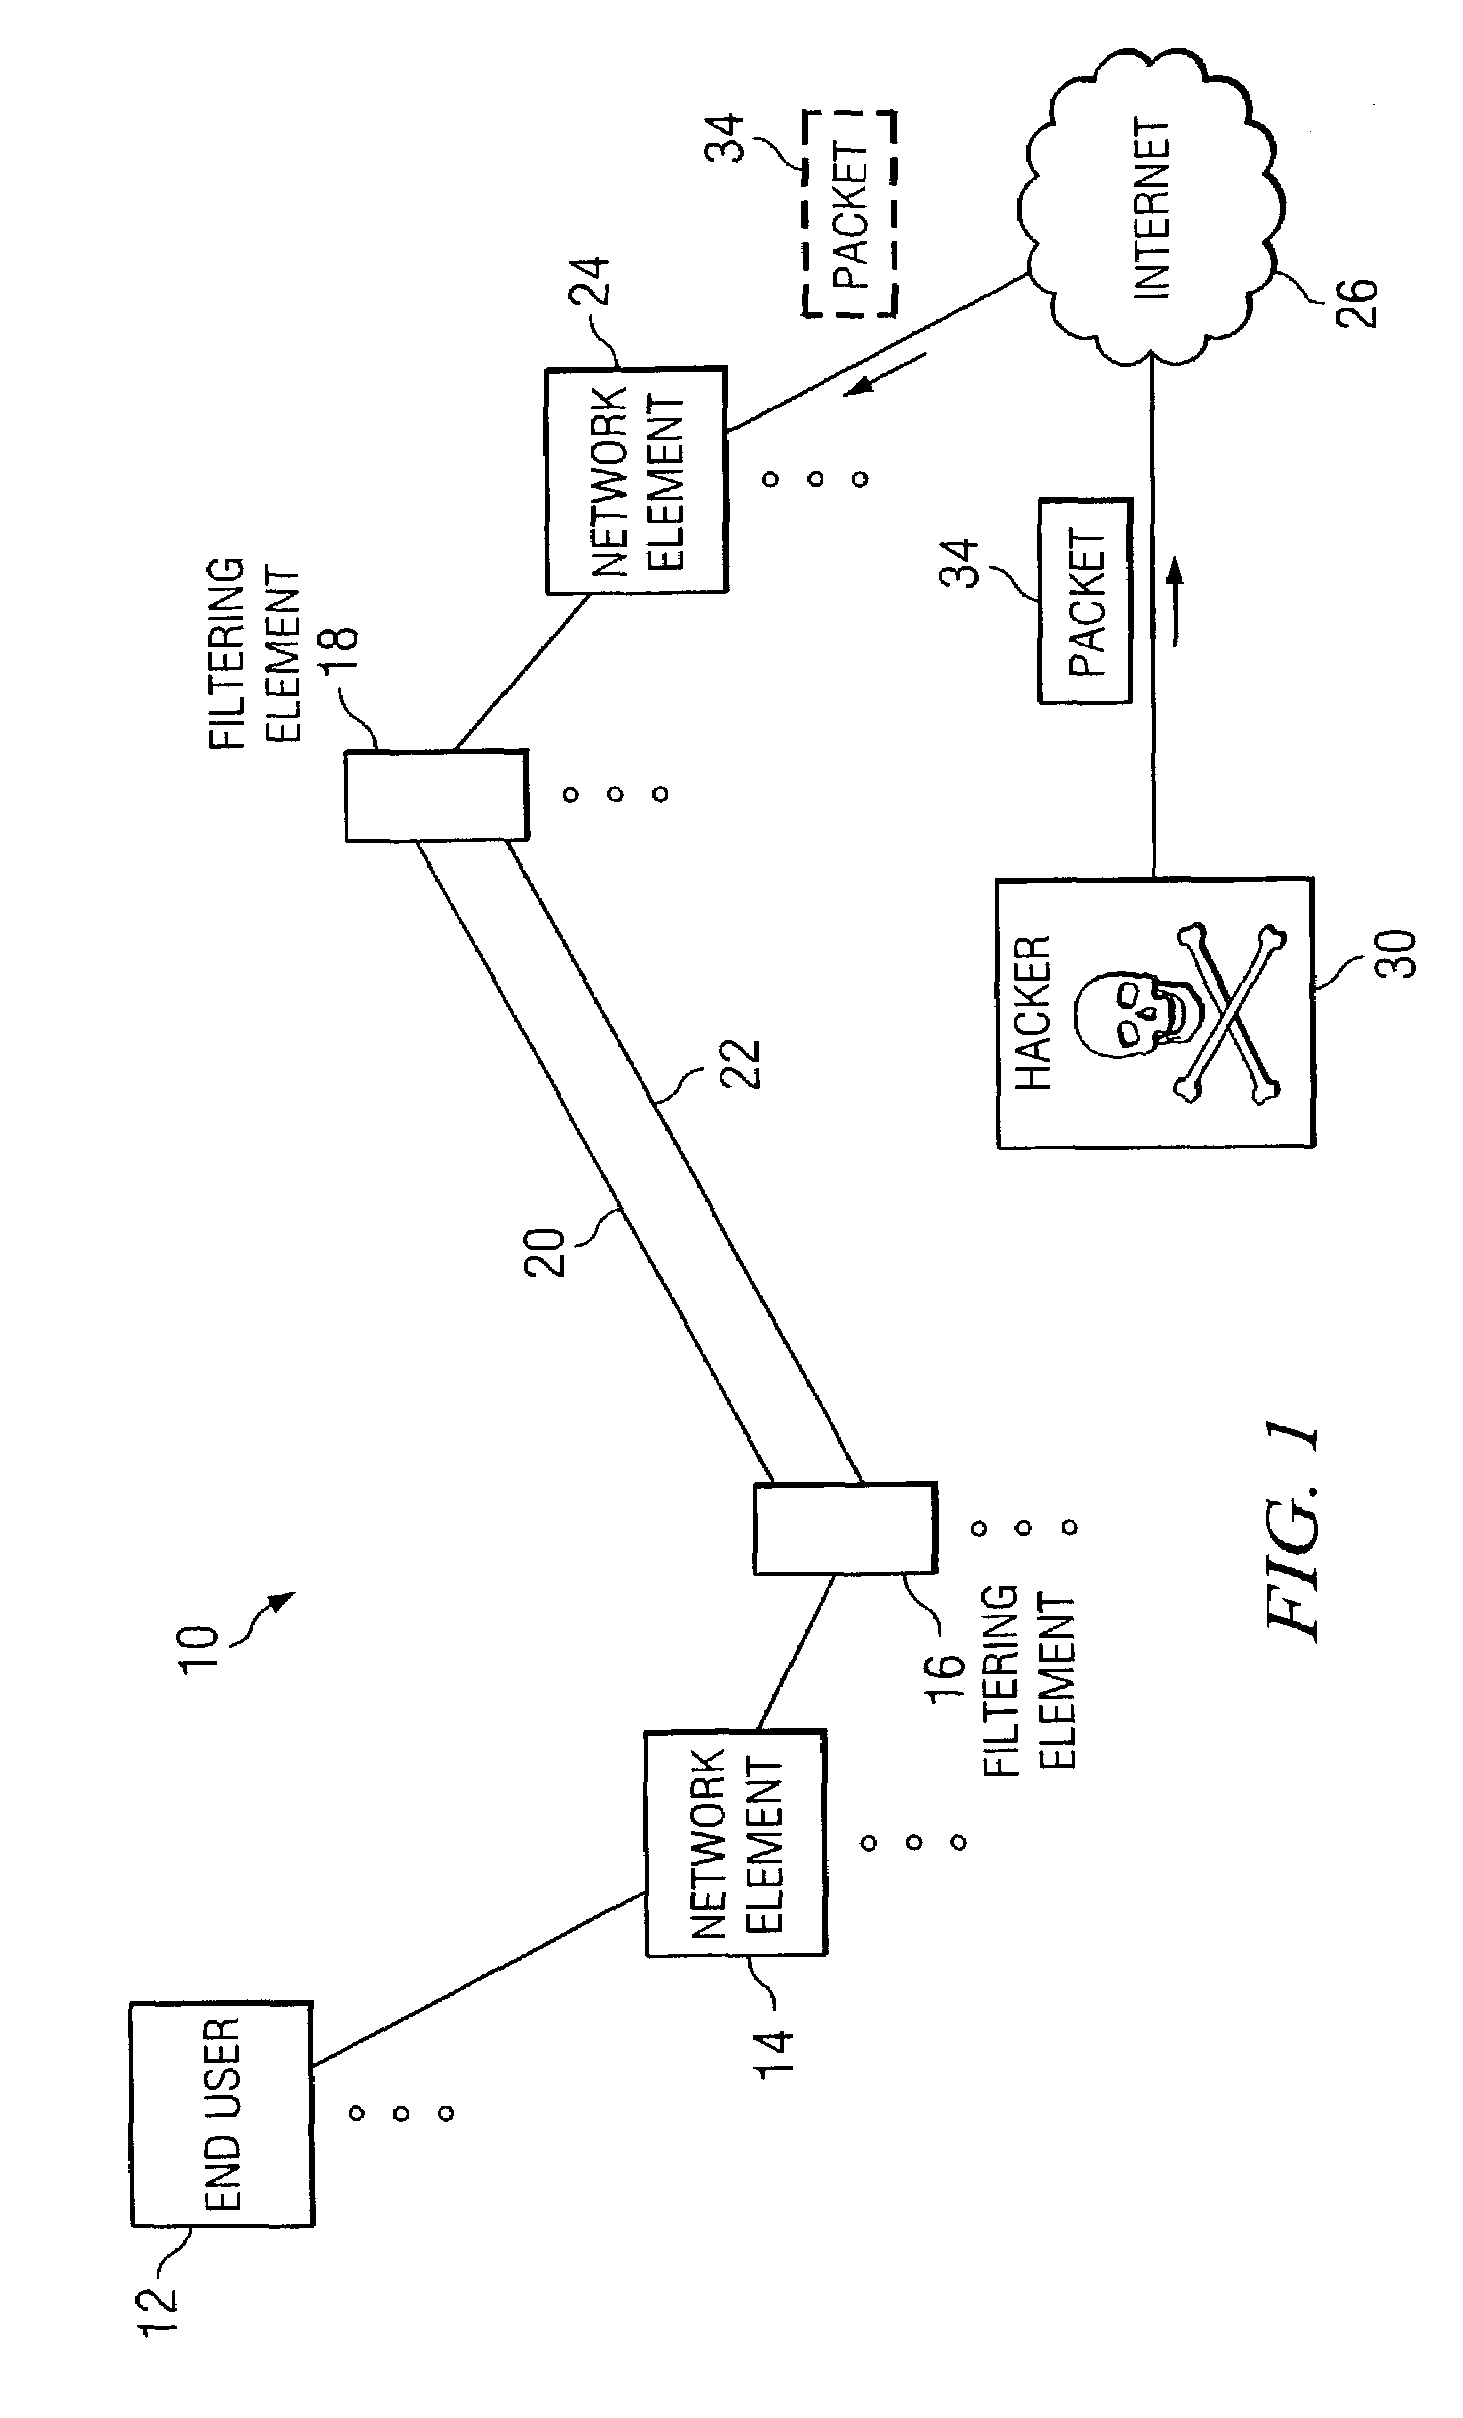 System and method for communicating packets in a network environment